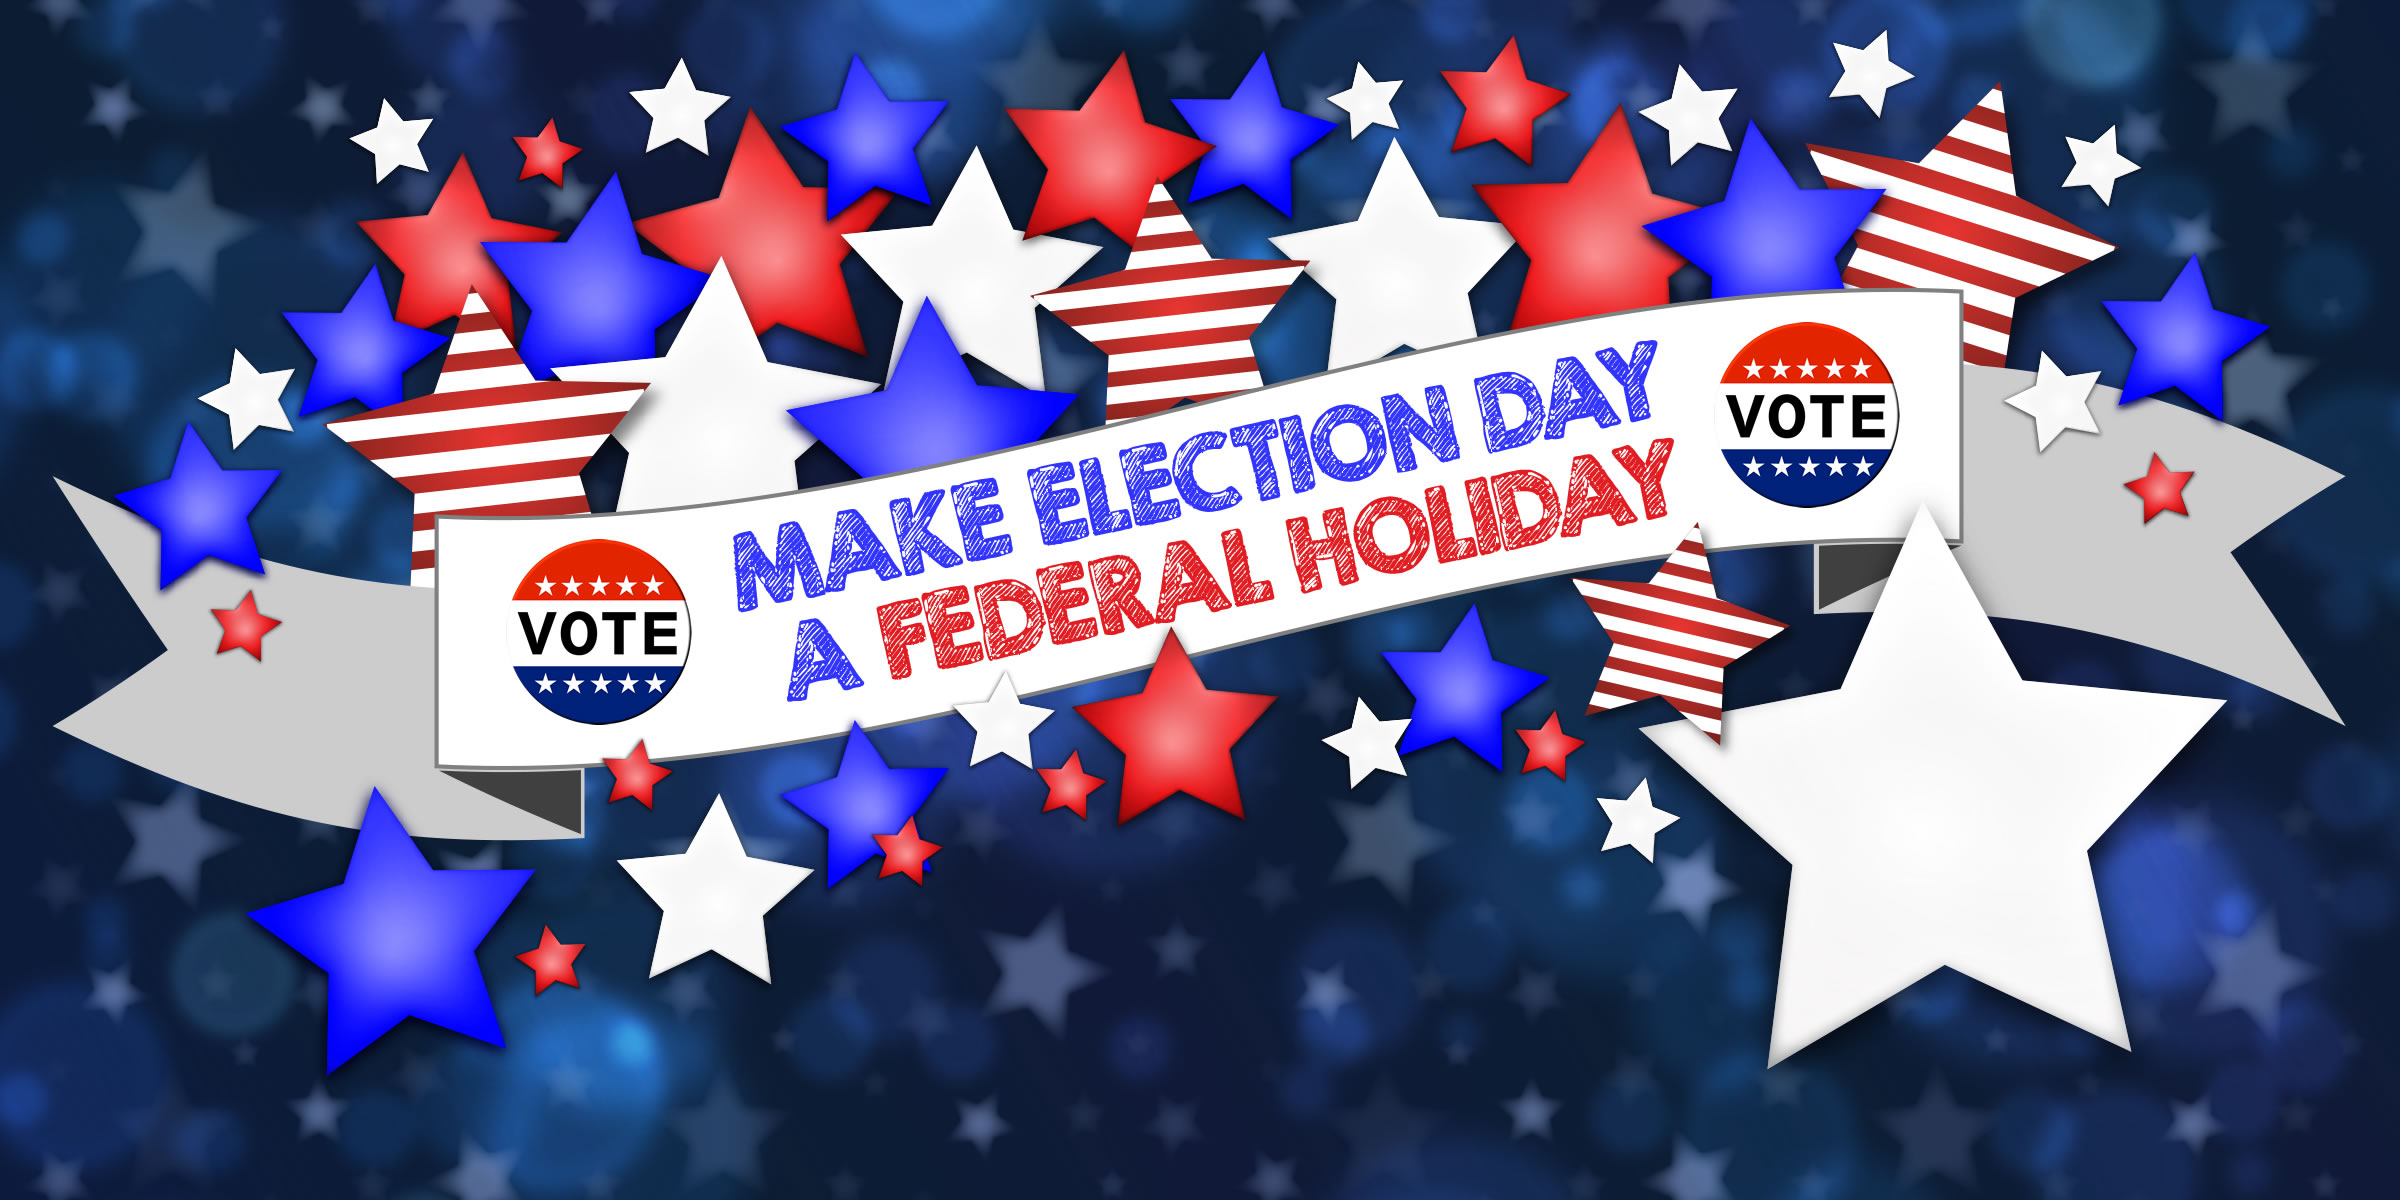 Make Election Day A Federal Holiday